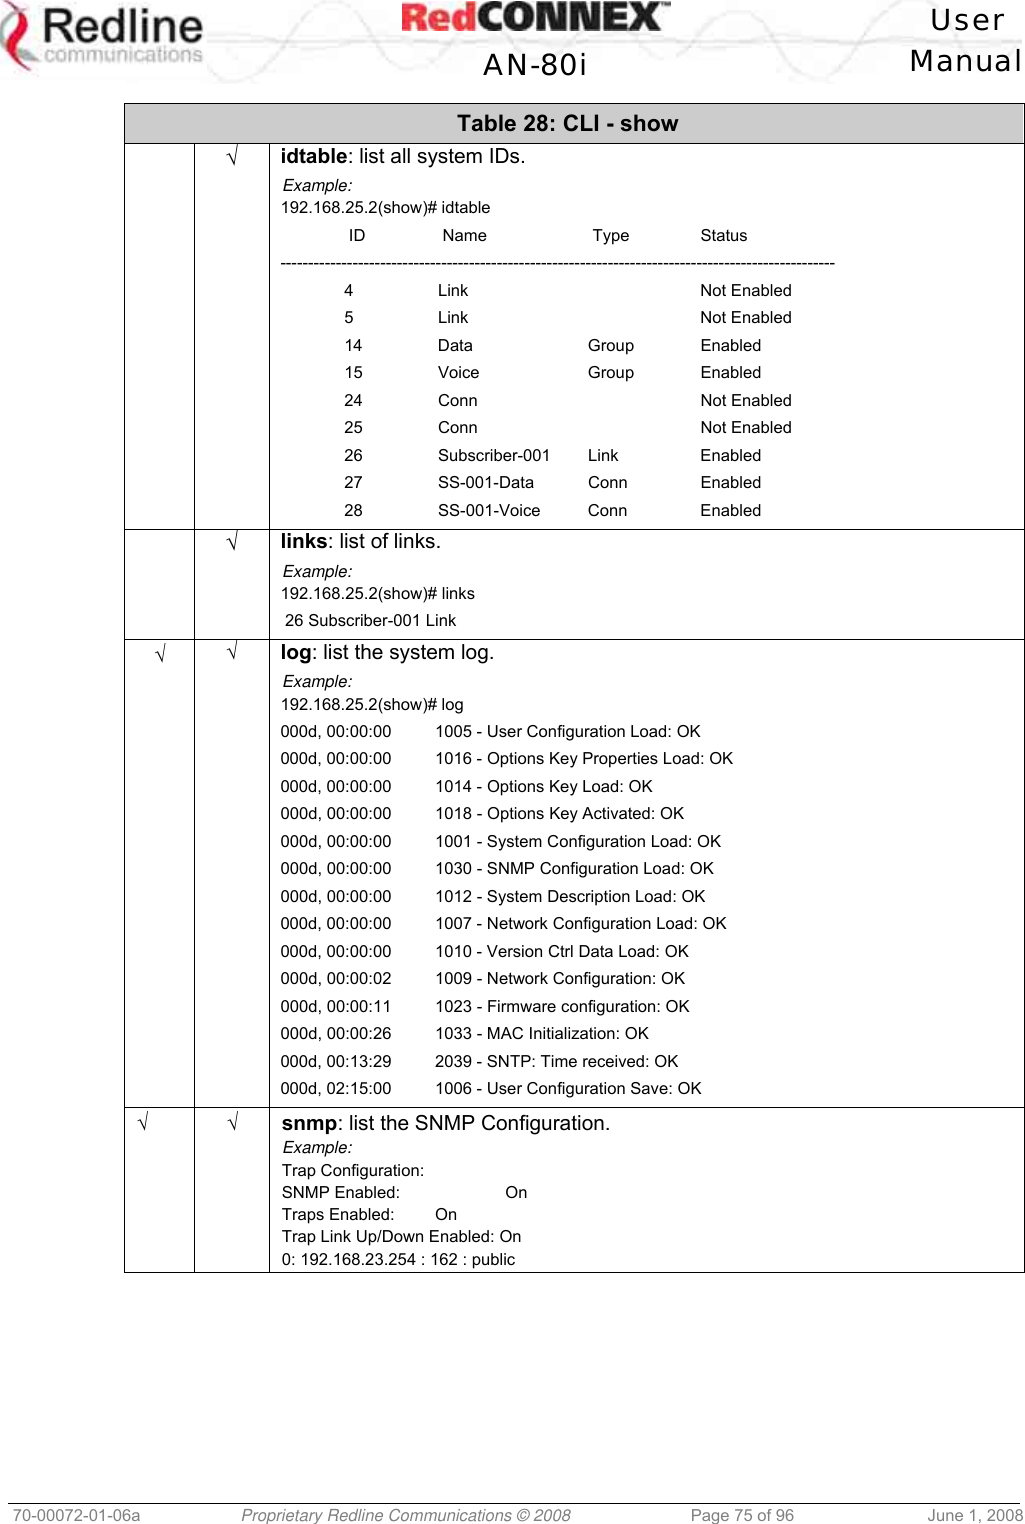   User  AN-80i Manual  70-00072-01-06a  Proprietary Redline Communications © 2008  Page 75 of 96  June 1, 2008 Table 28: CLI - show  √ idtable: list all system IDs. Example: 192.168.25.2(show)# idtable    ID   Name   Type  Status ----------------------------------------------------------------------------------------------------  4  Link    Not Enabled  5  Link    Not Enabled  14  Data  Group  Enabled  15  Voice  Group  Enabled  24  Conn    Not Enabled  25  Conn    Not Enabled  26  Subscriber-001 Link  Enabled  27  SS-001-Data Conn  Enabled  28  SS-001-Voice Conn  Enabled  √ links: list of links. Example: 192.168.25.2(show)# links  26 Subscriber-001 Link √ √ log: list the system log. Example: 192.168.25.2(show)# log 000d, 00:00:00   1005 - User Configuration Load: OK 000d, 00:00:00   1016 - Options Key Properties Load: OK 000d, 00:00:00   1014 - Options Key Load: OK 000d, 00:00:00   1018 - Options Key Activated: OK 000d, 00:00:00   1001 - System Configuration Load: OK 000d, 00:00:00   1030 - SNMP Configuration Load: OK 000d, 00:00:00   1012 - System Description Load: OK 000d, 00:00:00   1007 - Network Configuration Load: OK 000d, 00:00:00   1010 - Version Ctrl Data Load: OK 000d, 00:00:02   1009 - Network Configuration: OK 000d, 00:00:11   1023 - Firmware configuration: OK 000d, 00:00:26   1033 - MAC Initialization: OK 000d, 00:13:29   2039 - SNTP: Time received: OK 000d, 02:15:00   1006 - User Configuration Save: OK √ √ snmp: list the SNMP Configuration. Example: Trap Configuration: SNMP Enabled:    On Traps Enabled:   On Trap Link Up/Down Enabled: On 0: 192.168.23.254 : 162 : public 